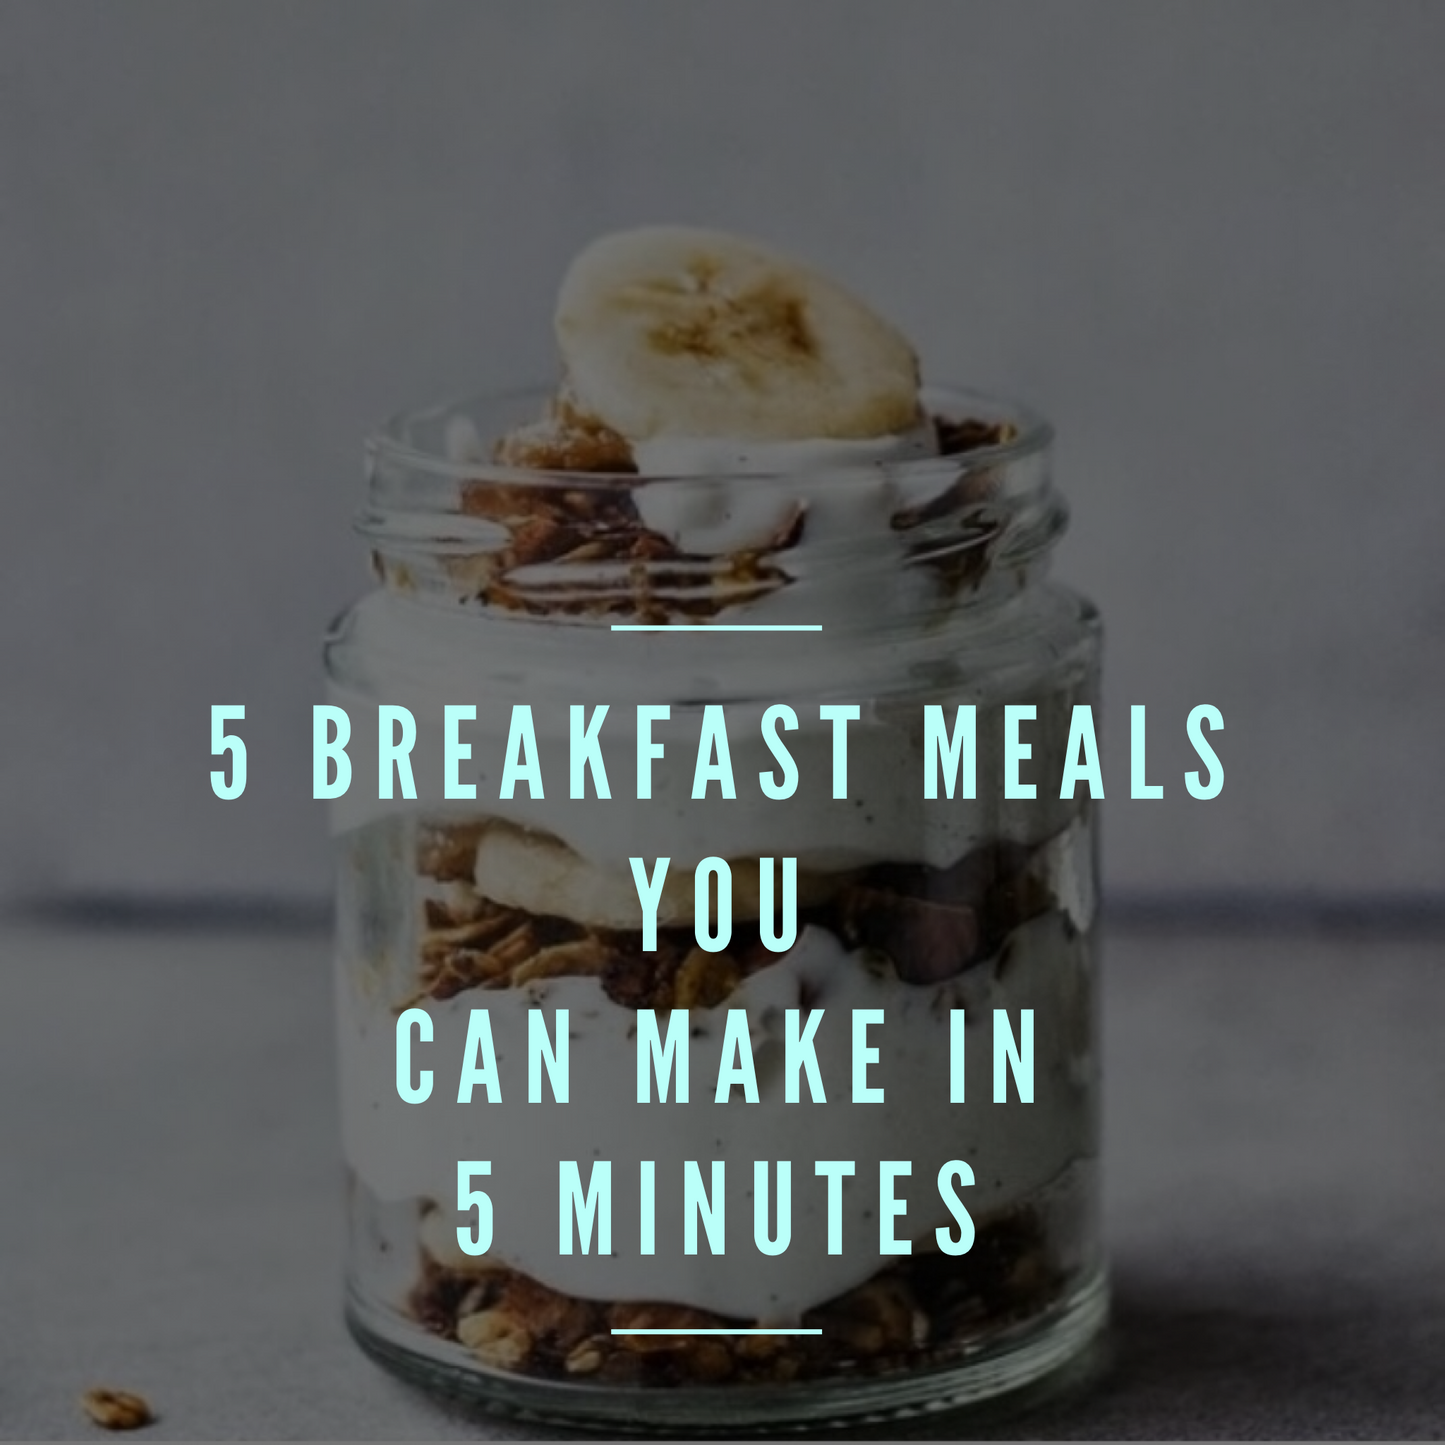 5 Breakfast Meals You Can Make In 5 Minutes